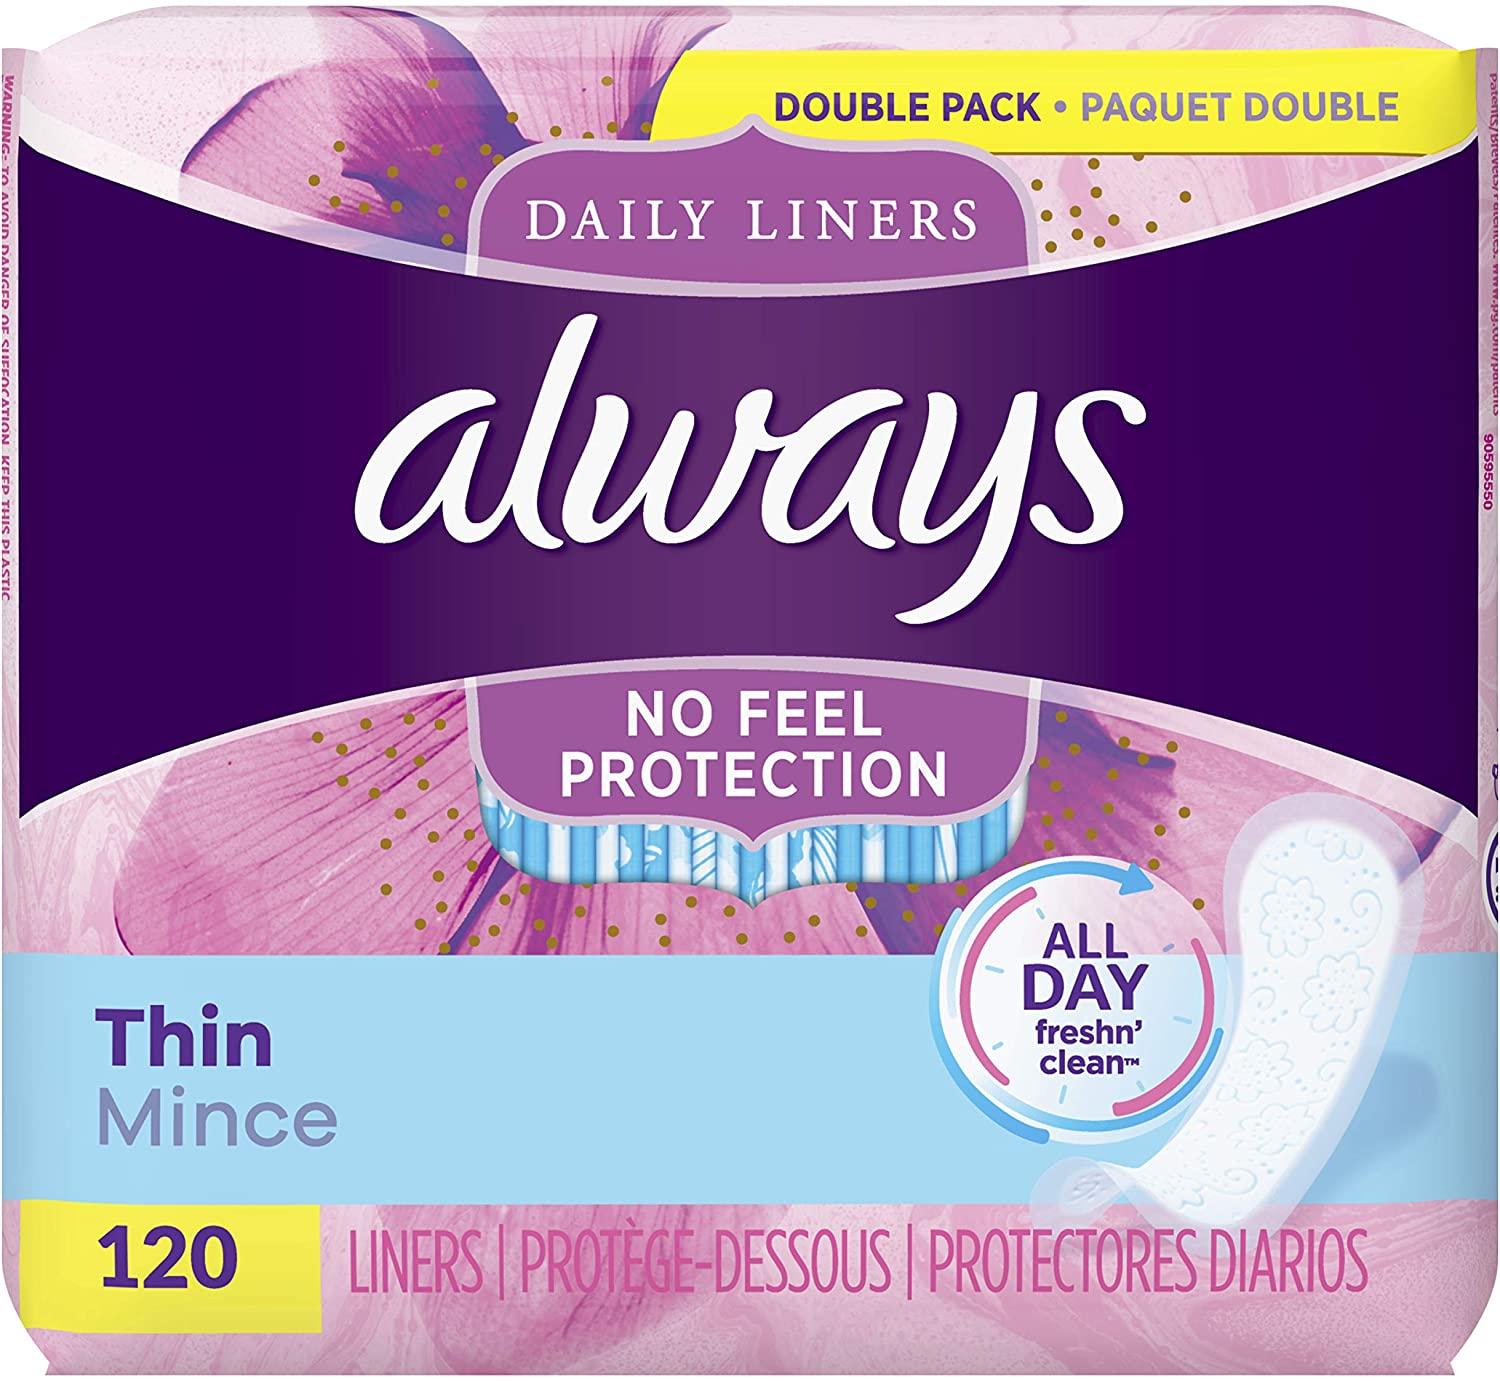 120 Always Thin Daily Liners for $4.42